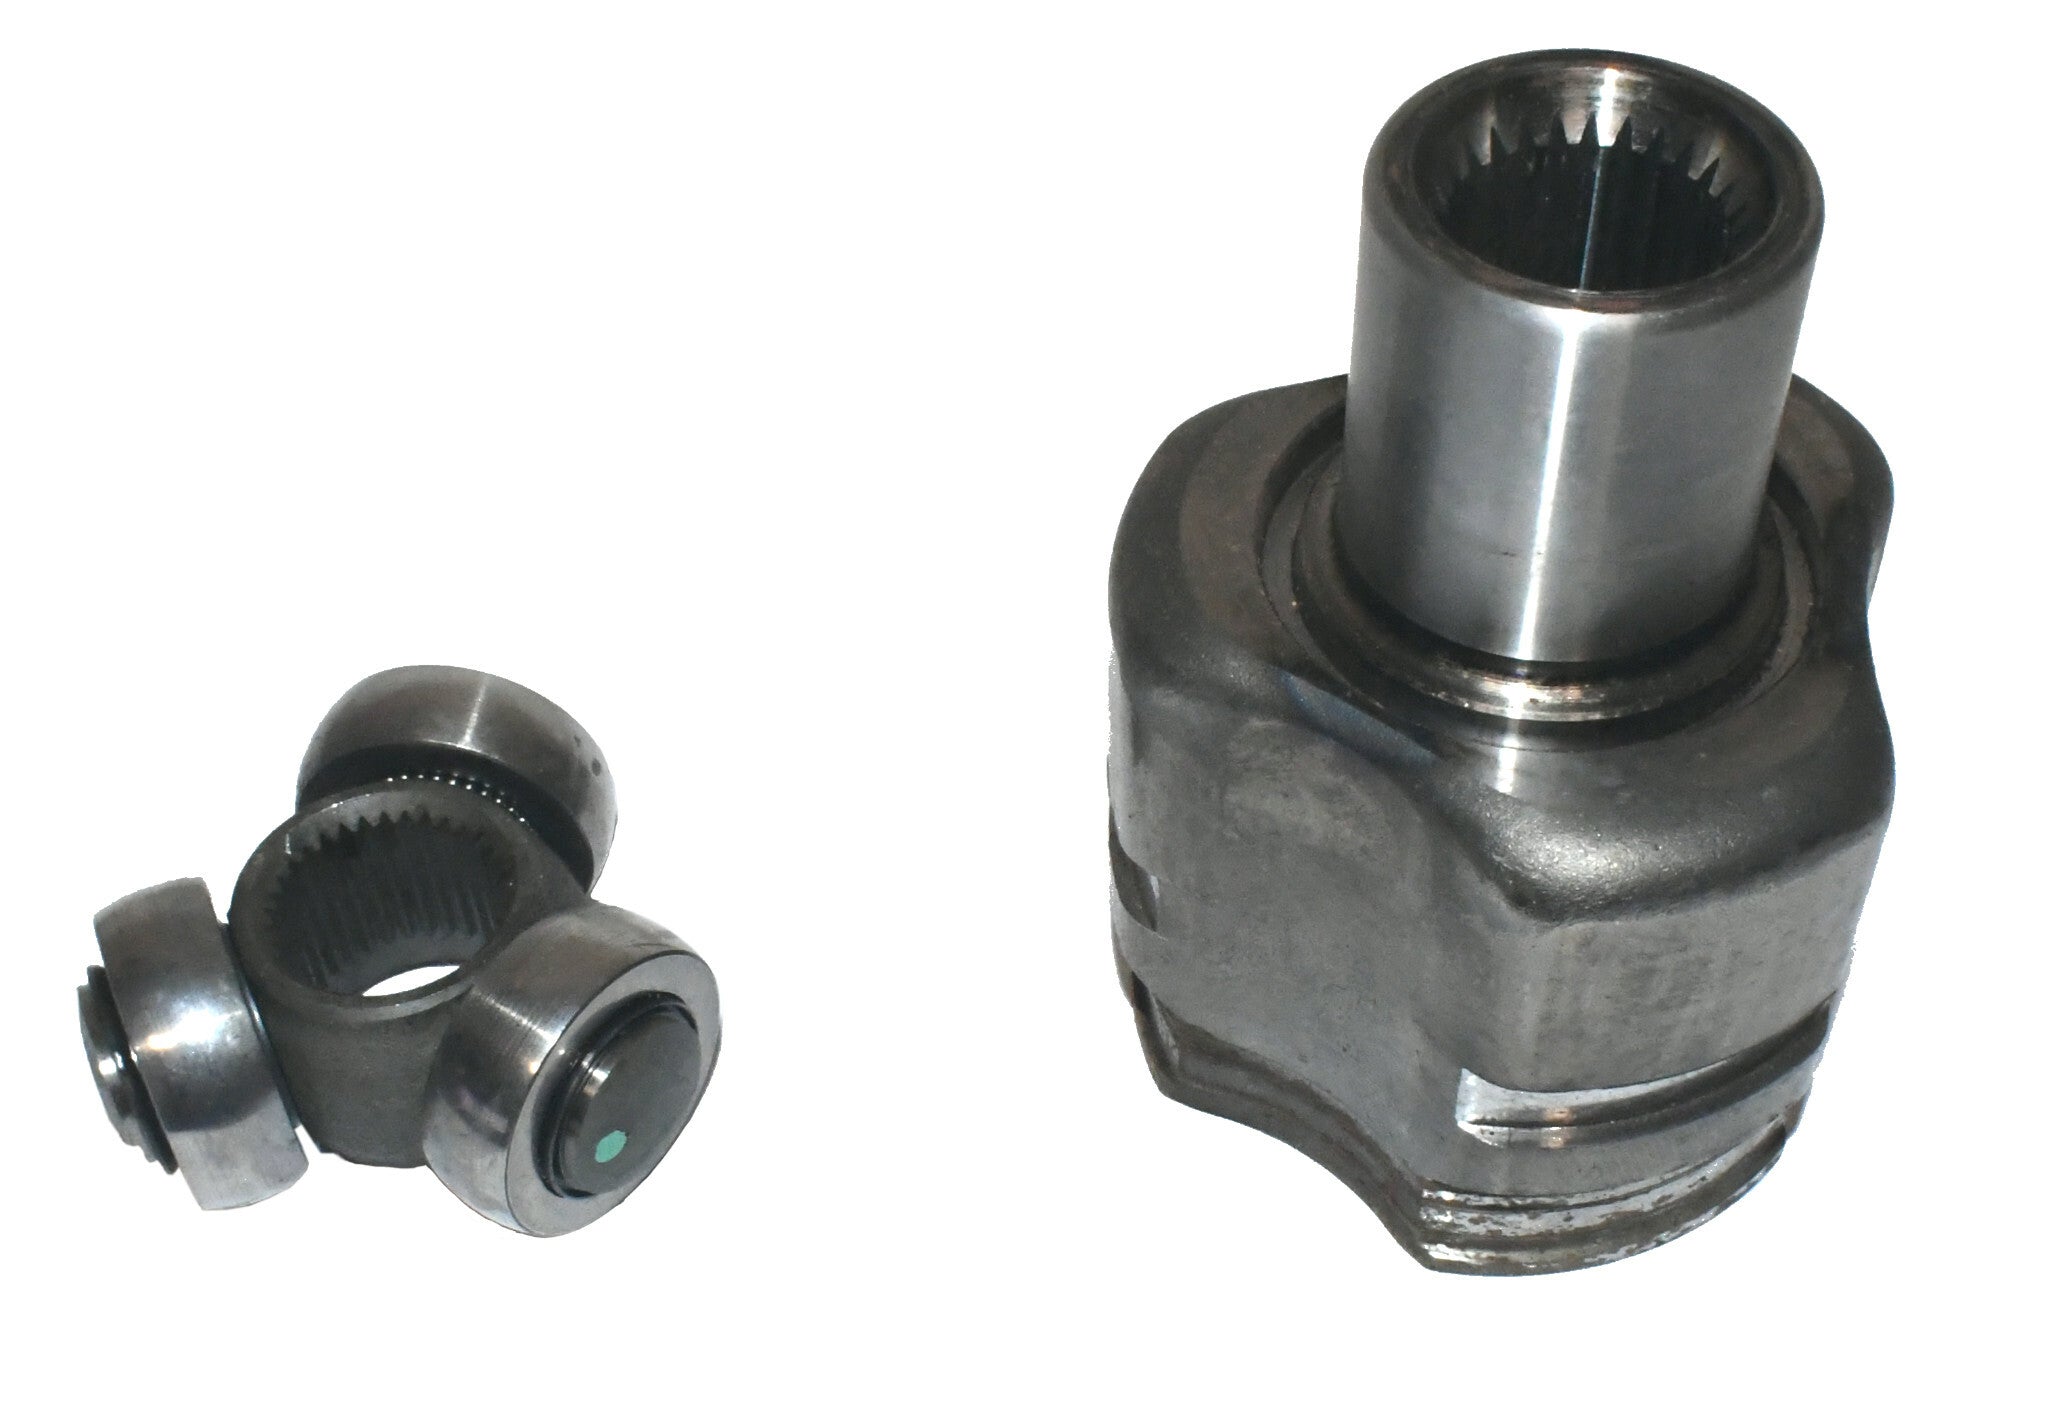 New inboard right CV joint for Ford Explorer, Ranger, Mercury Mountaineer from Ford F5TZ-3B414-A